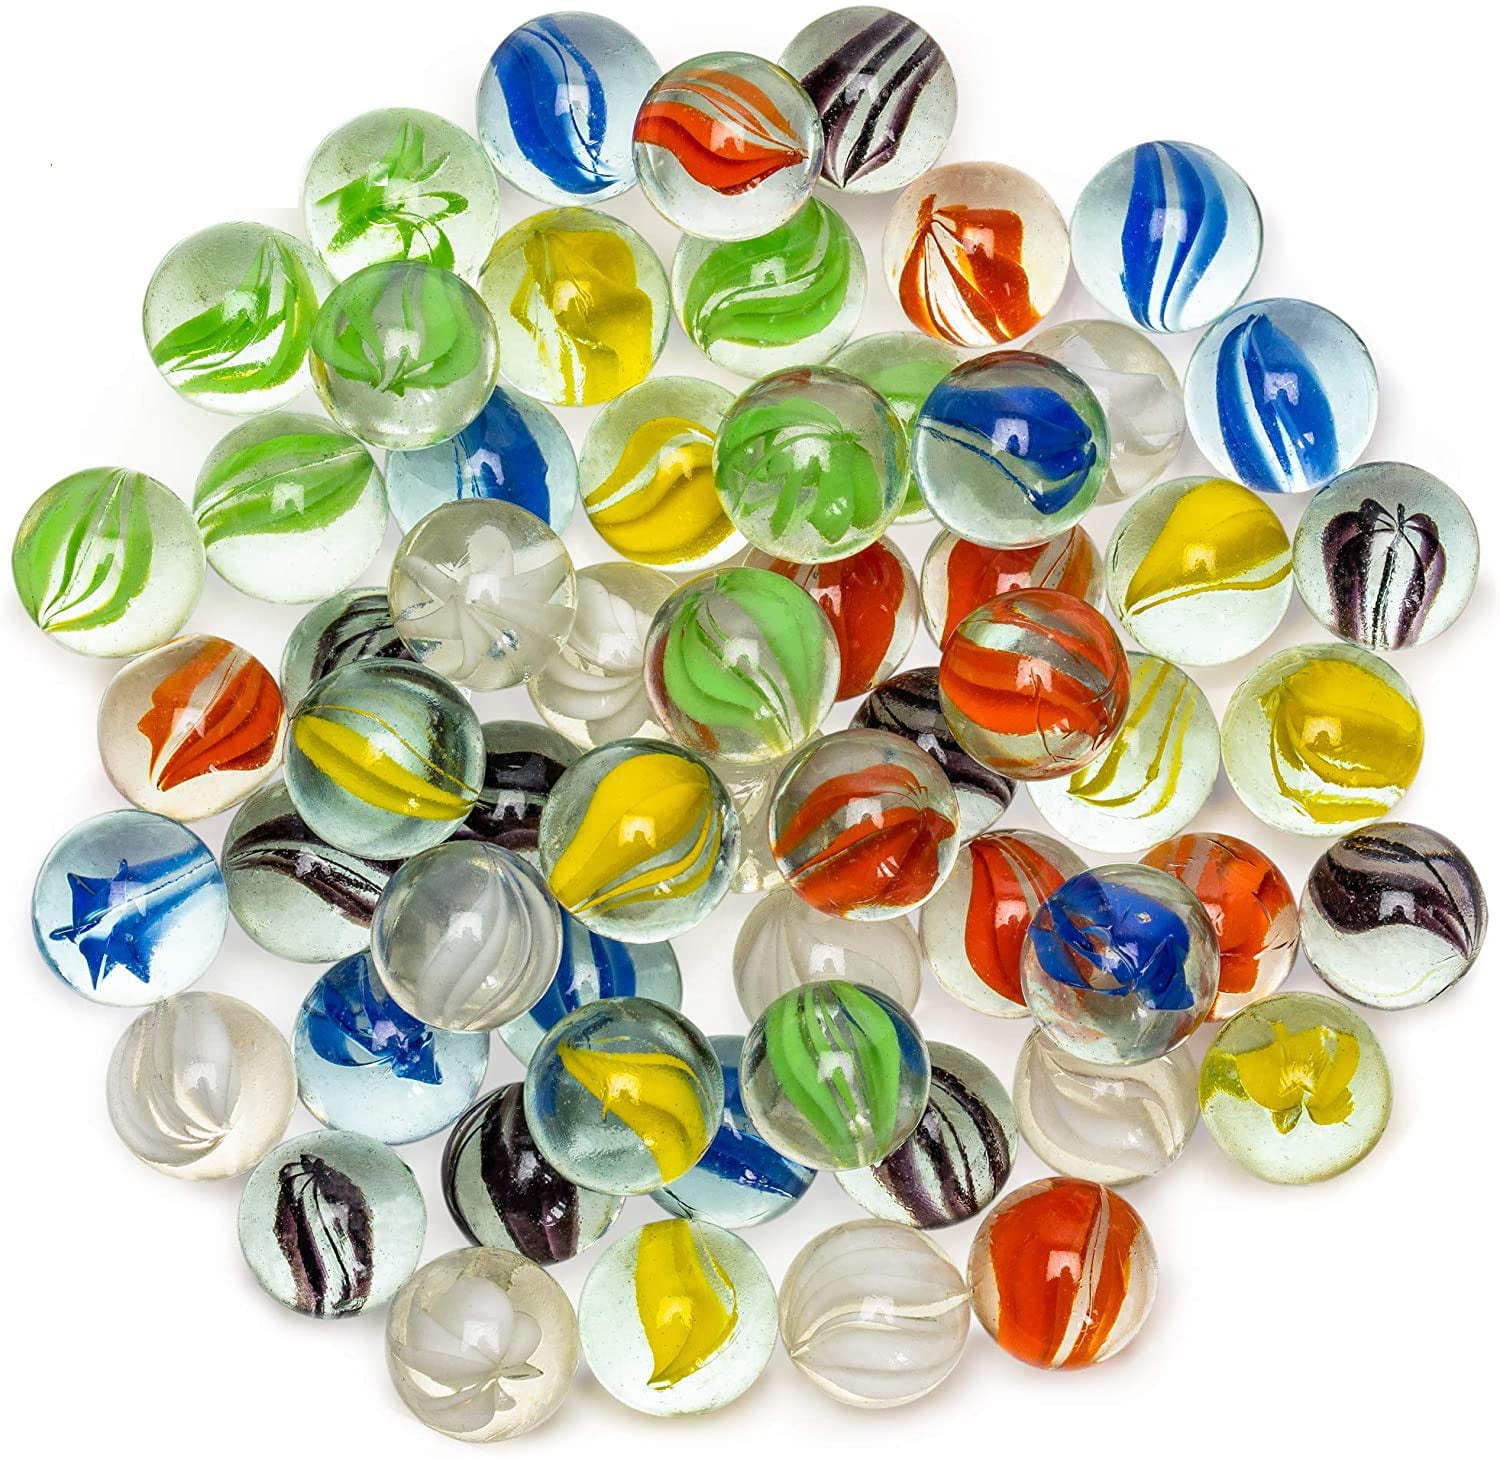 100 Glass Marbles Multi Coloured Kids Toy Traditional Vintage Target Games Retro 